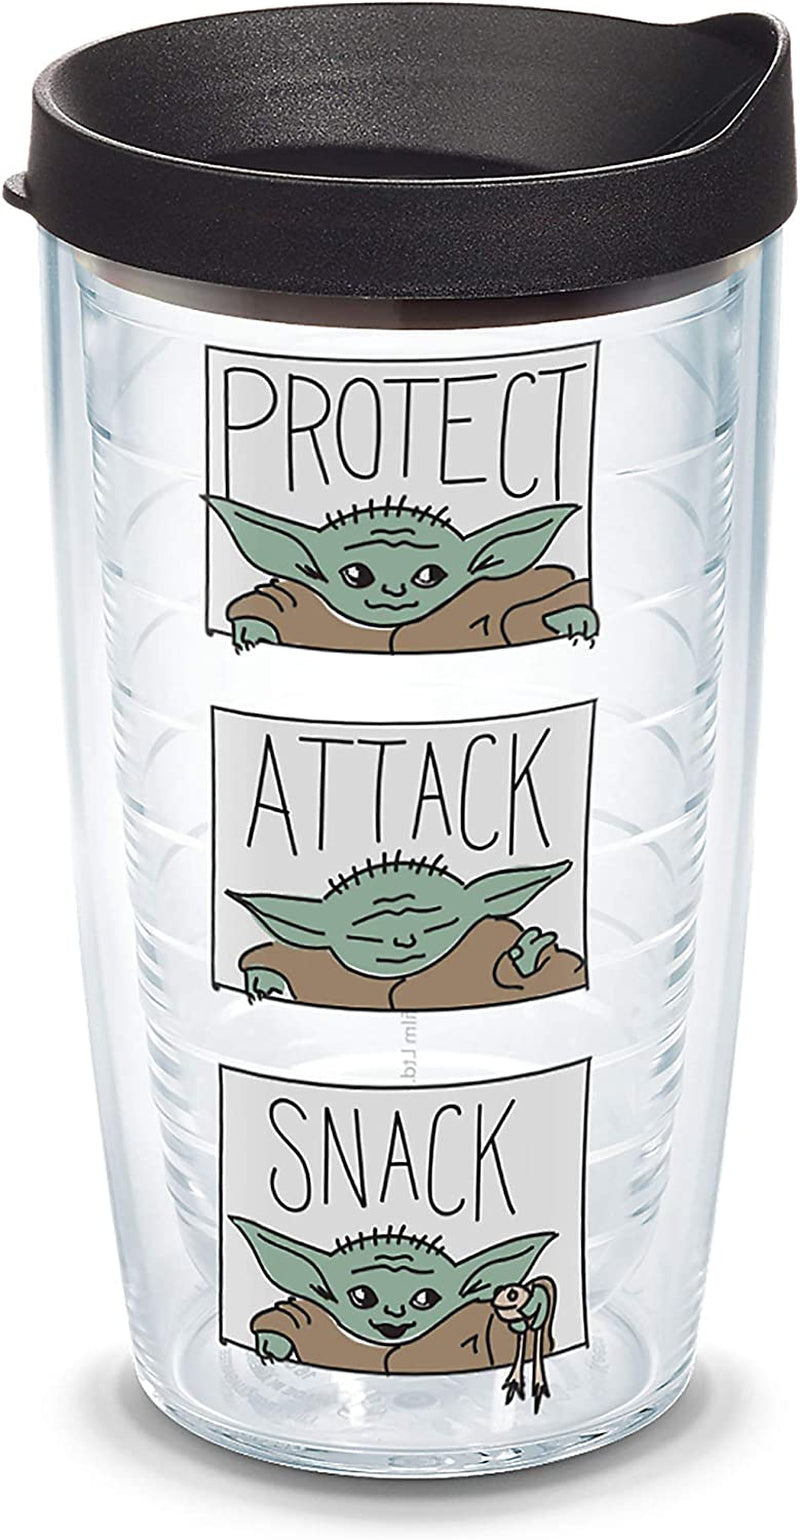 Tervis Triple Walled Star Wars - the Mandalorian Protect Attack Snack Insulated Tumbler Cup Keeps Drinks Cold & Hot, 20Oz - Stainless Steel, Stainless Steel Home & Garden > Kitchen & Dining > Tableware > Drinkware Tervis Classic Contemporary 